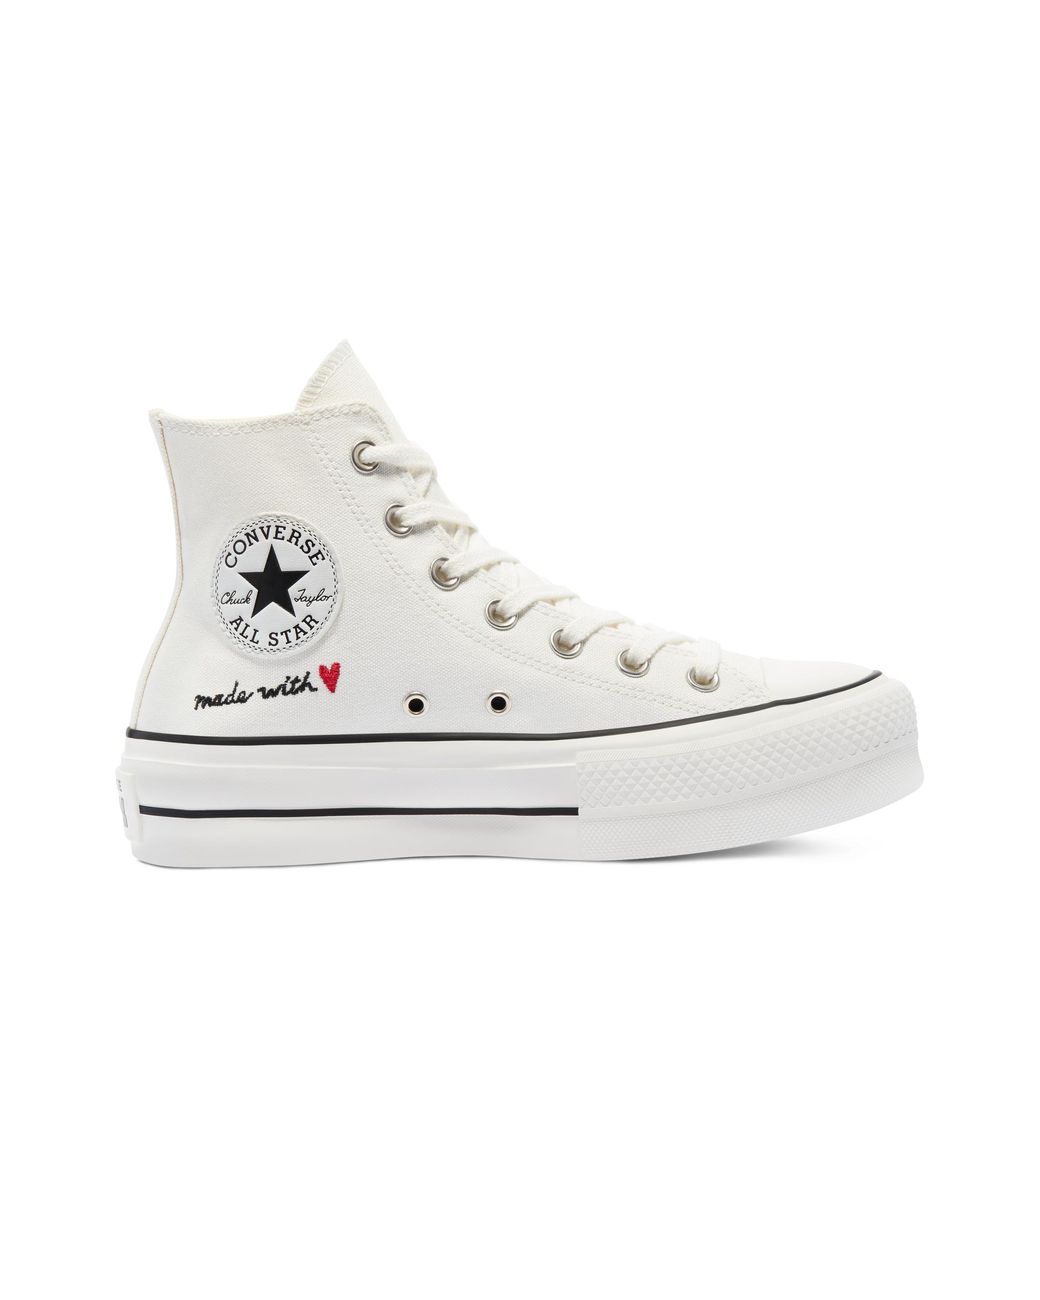 Converse Made With Love Platform Chuck Taylor All Star in White | Lyst